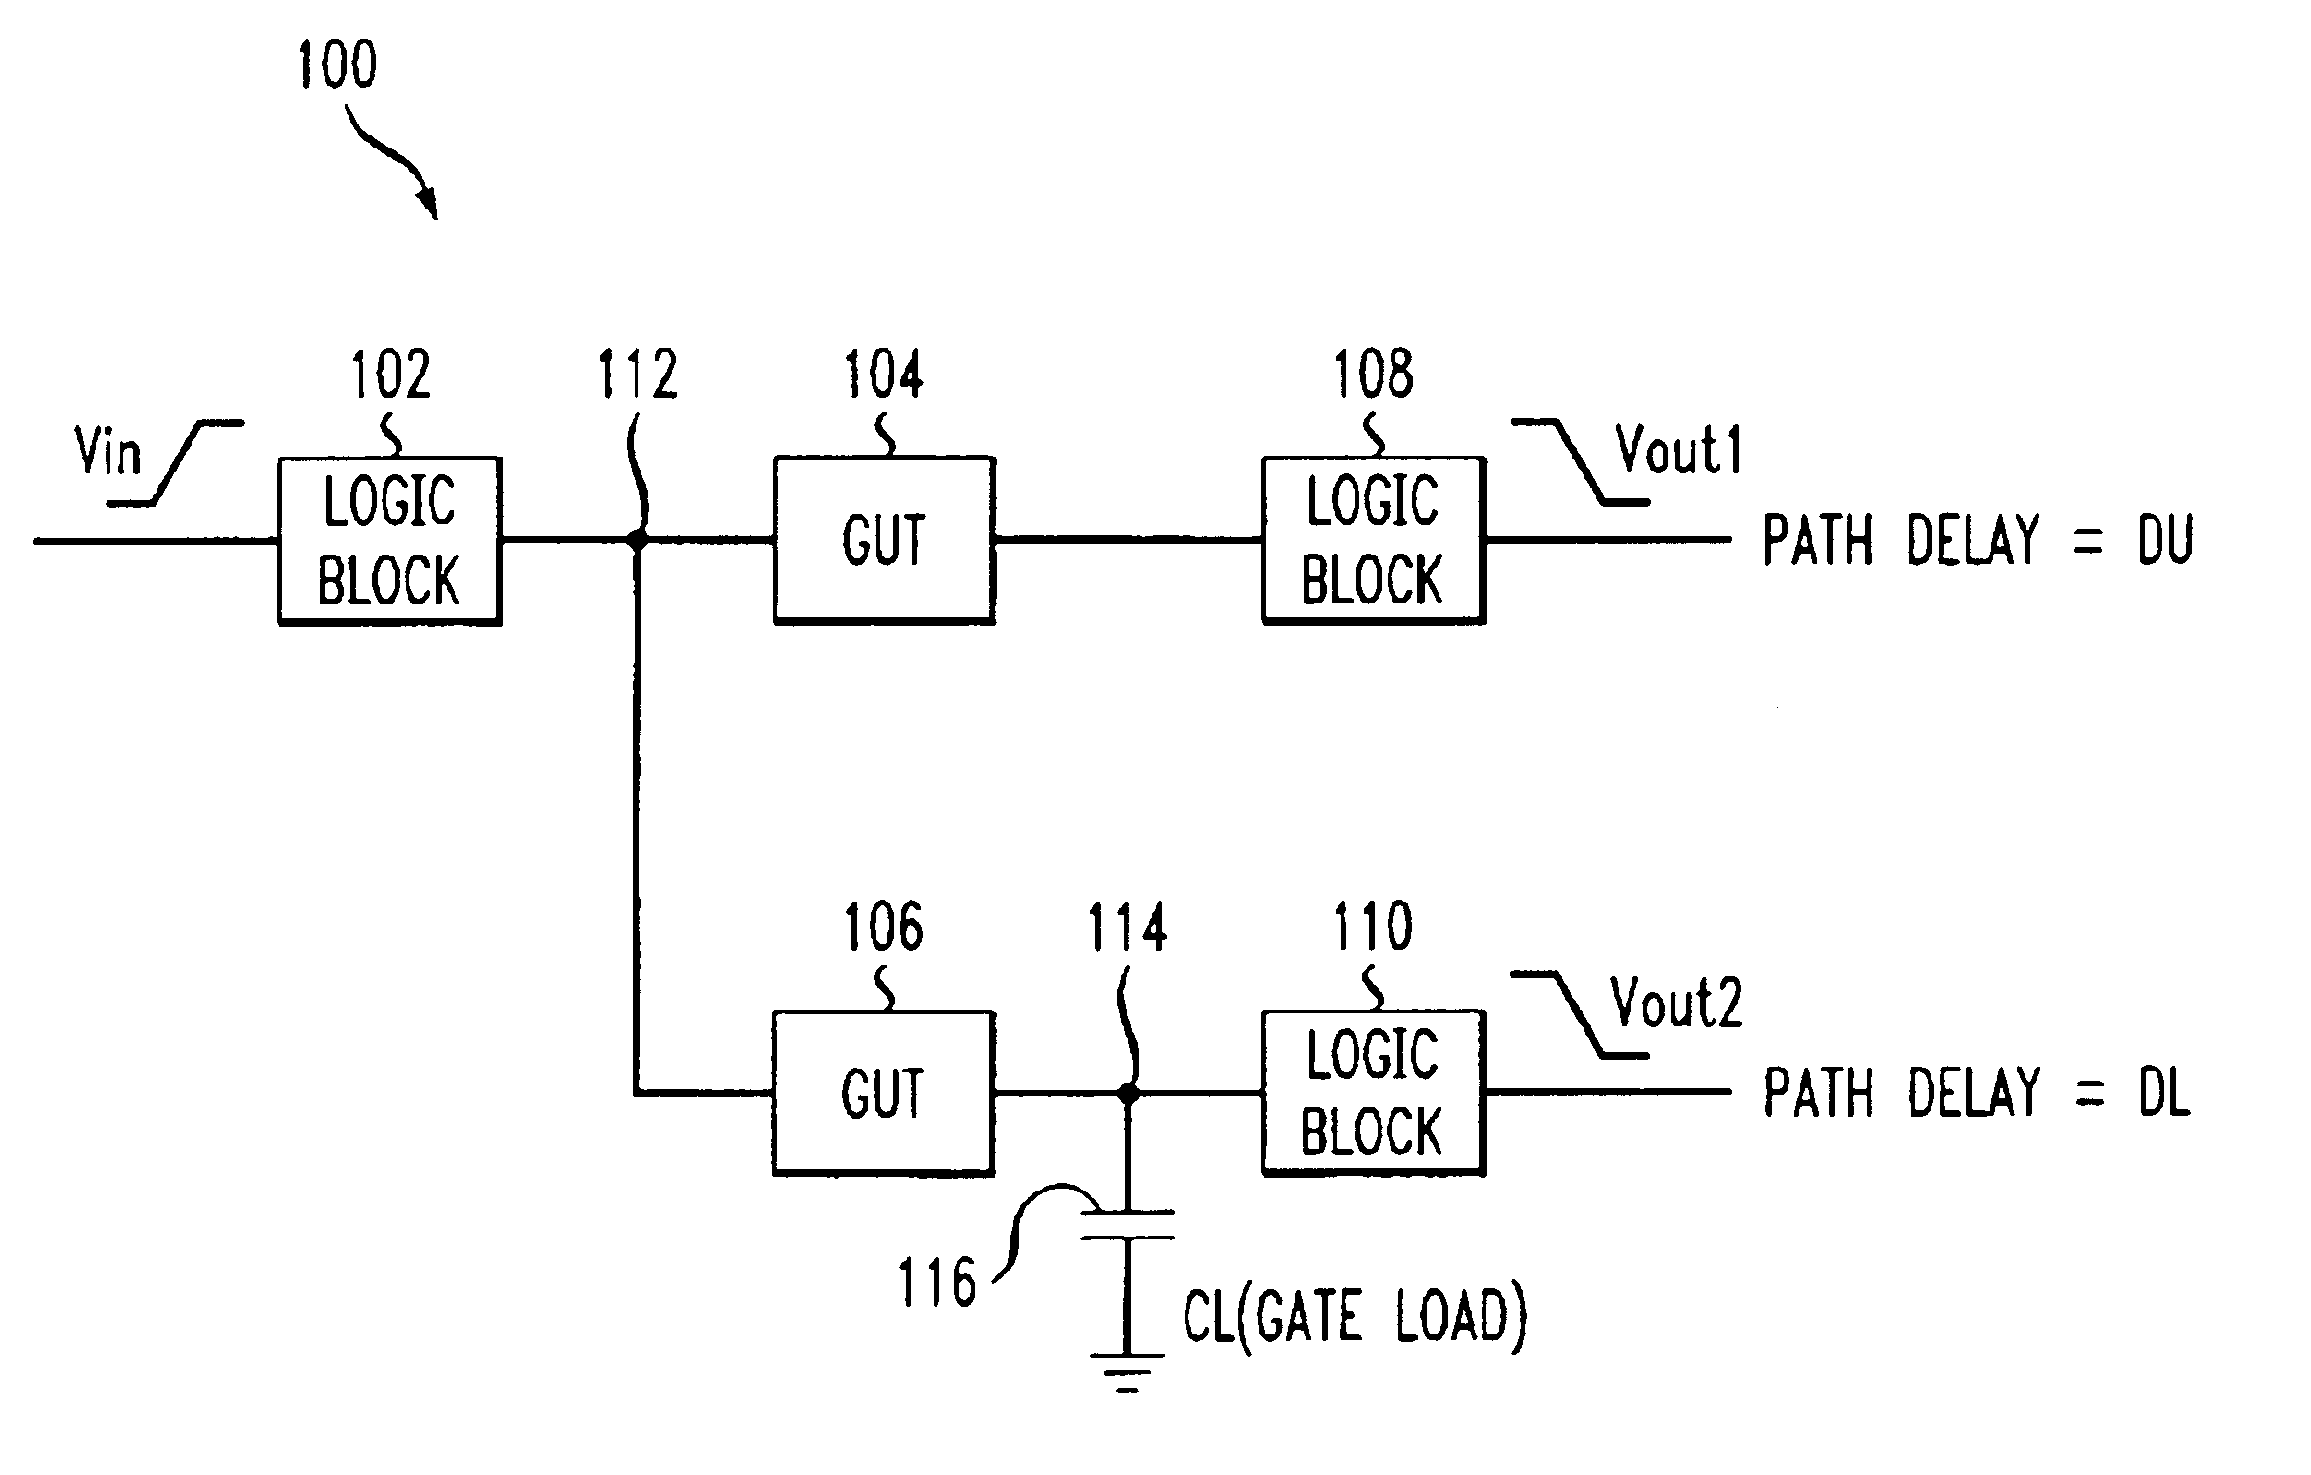 Method and apparatus for characterizing a circuit with multiple inputs